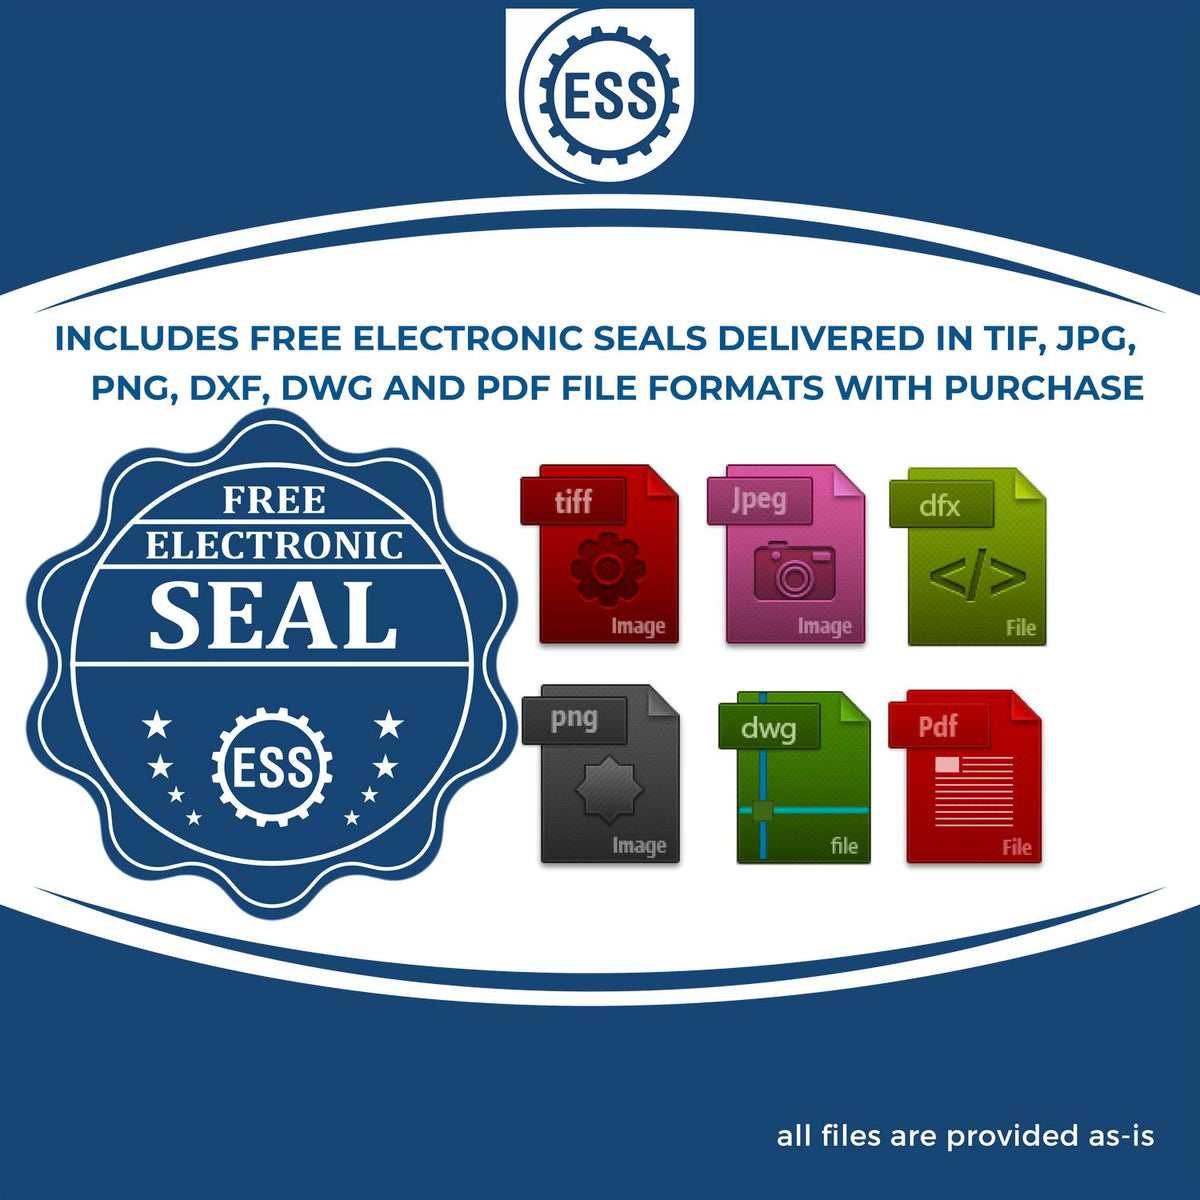 An infographic for the free electronic seal for the Heavy-Duty Mississippi Rectangular Notary Stamp illustrating the different file type icons such as DXF, DWG, TIF, JPG and PNG.